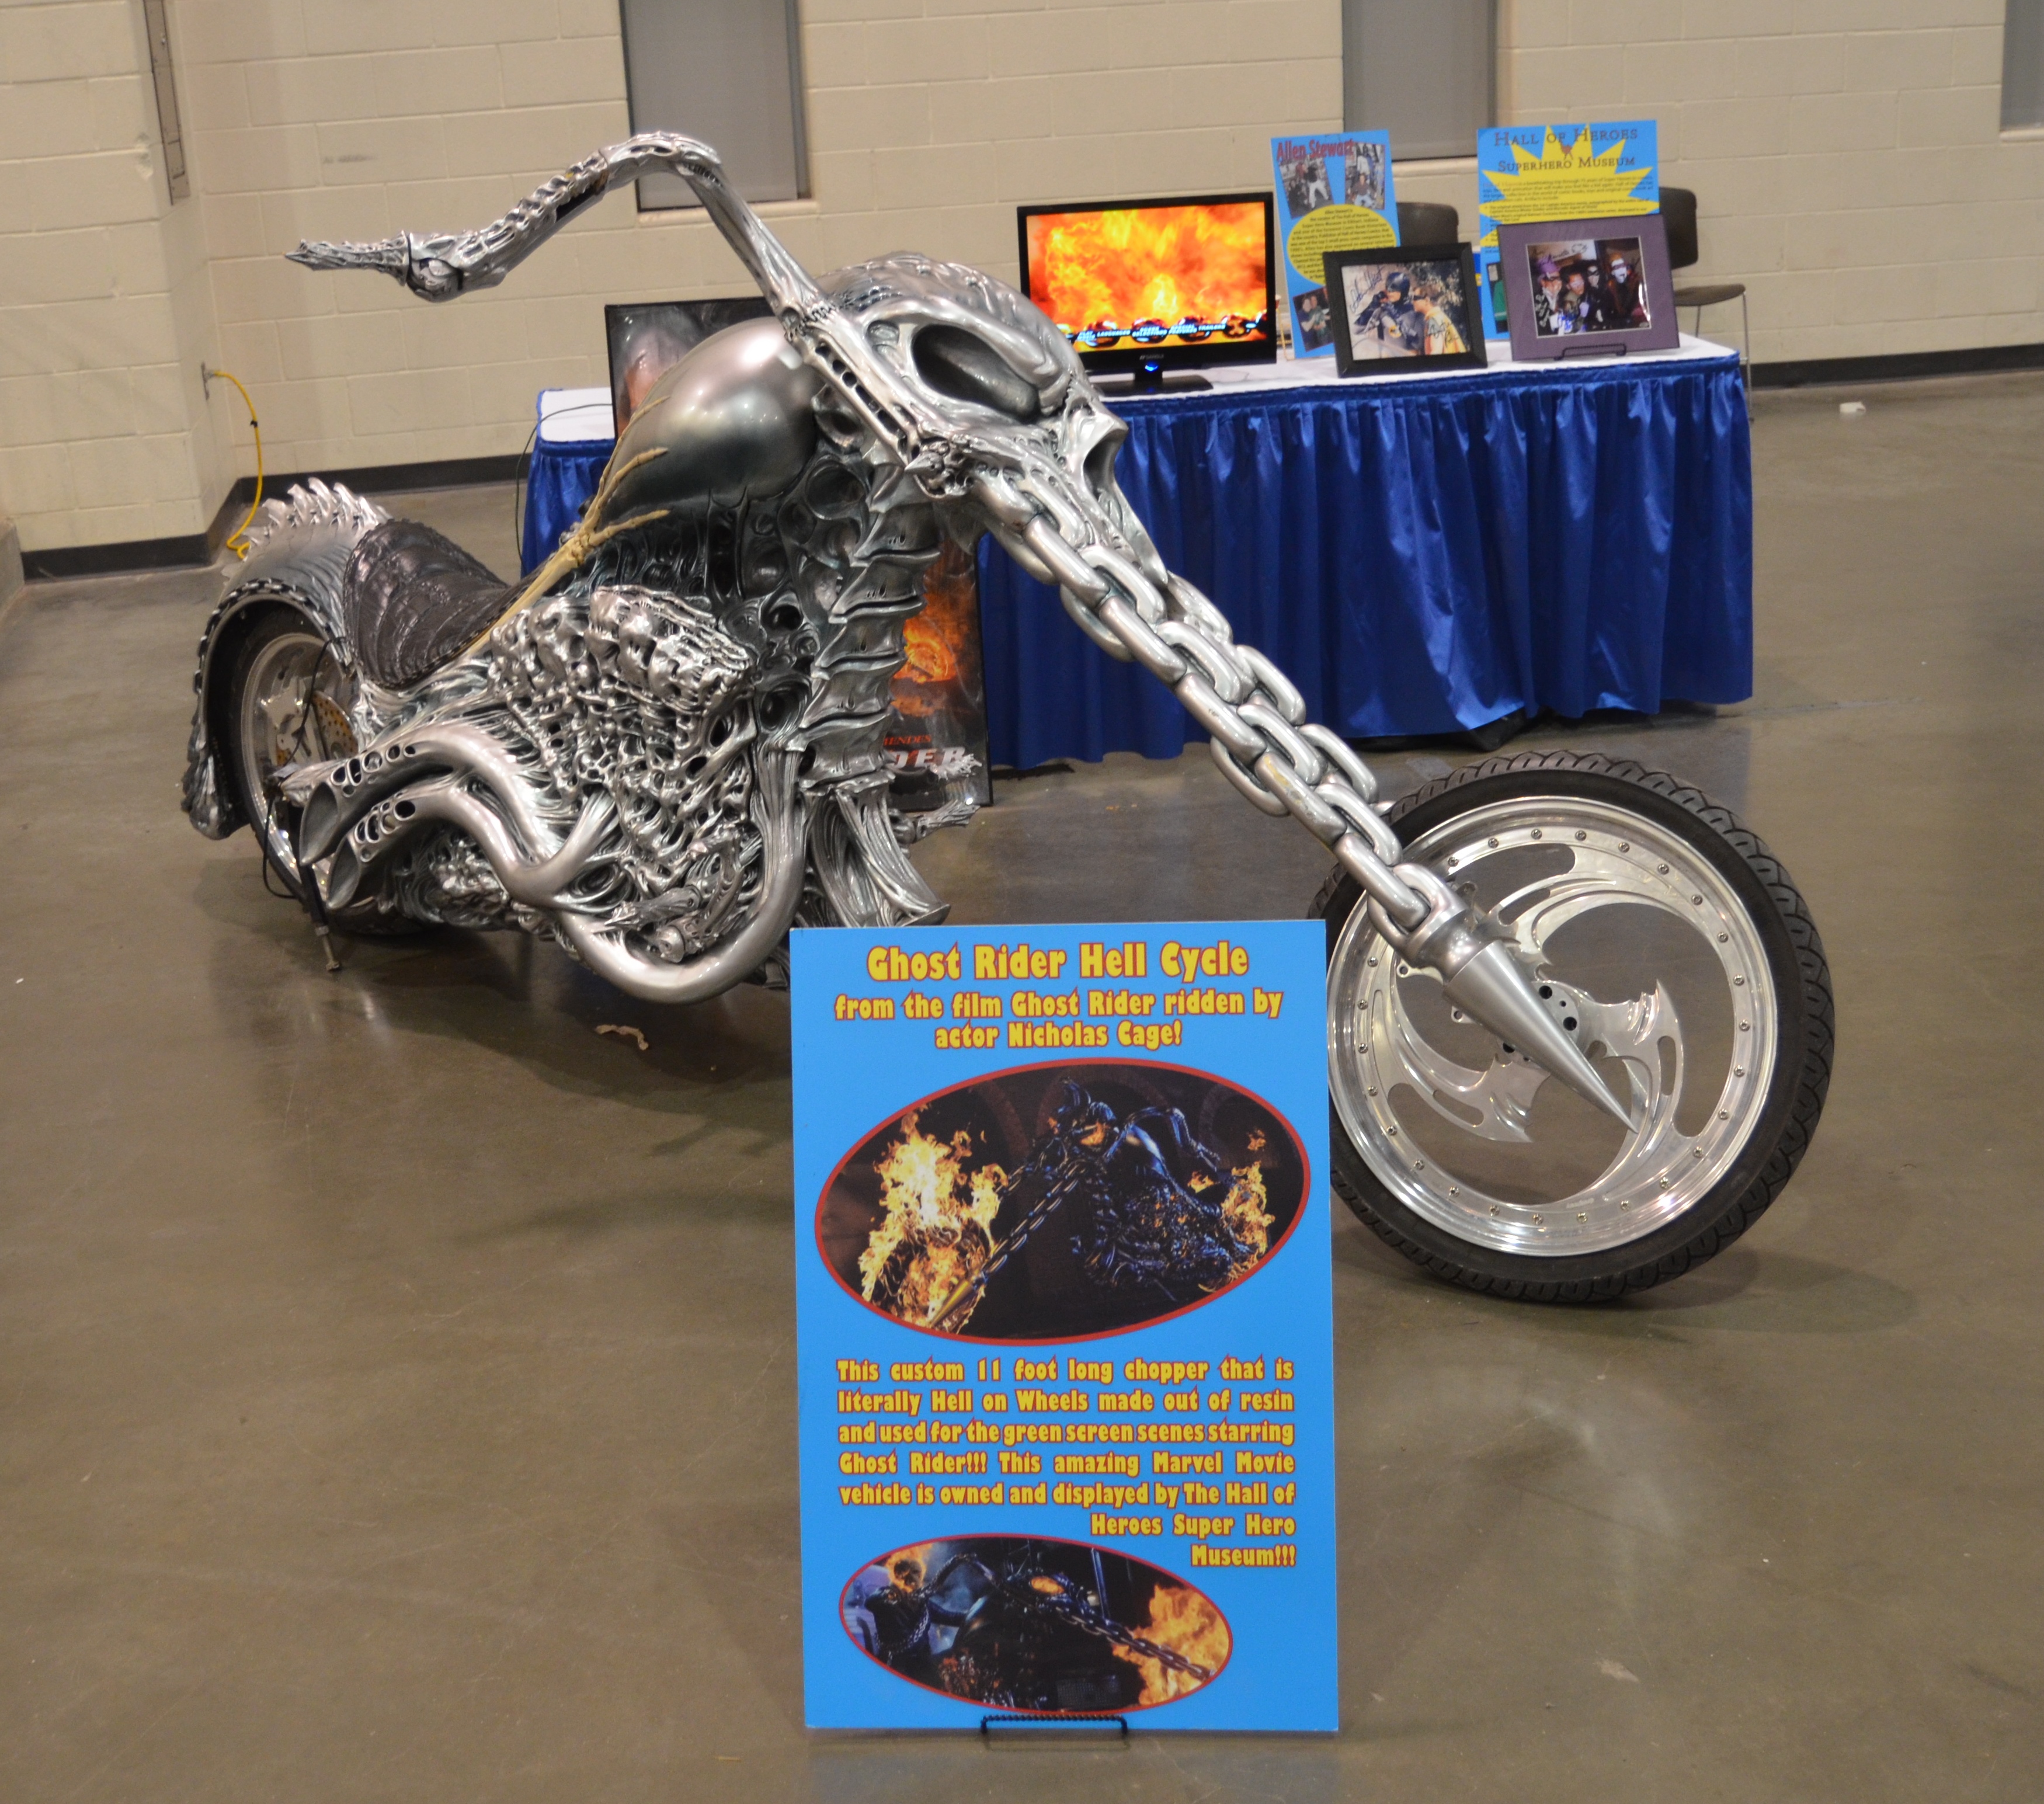 The Ghost Rider motorcylce was one of several vehicles at Grand Rapids Comic Con